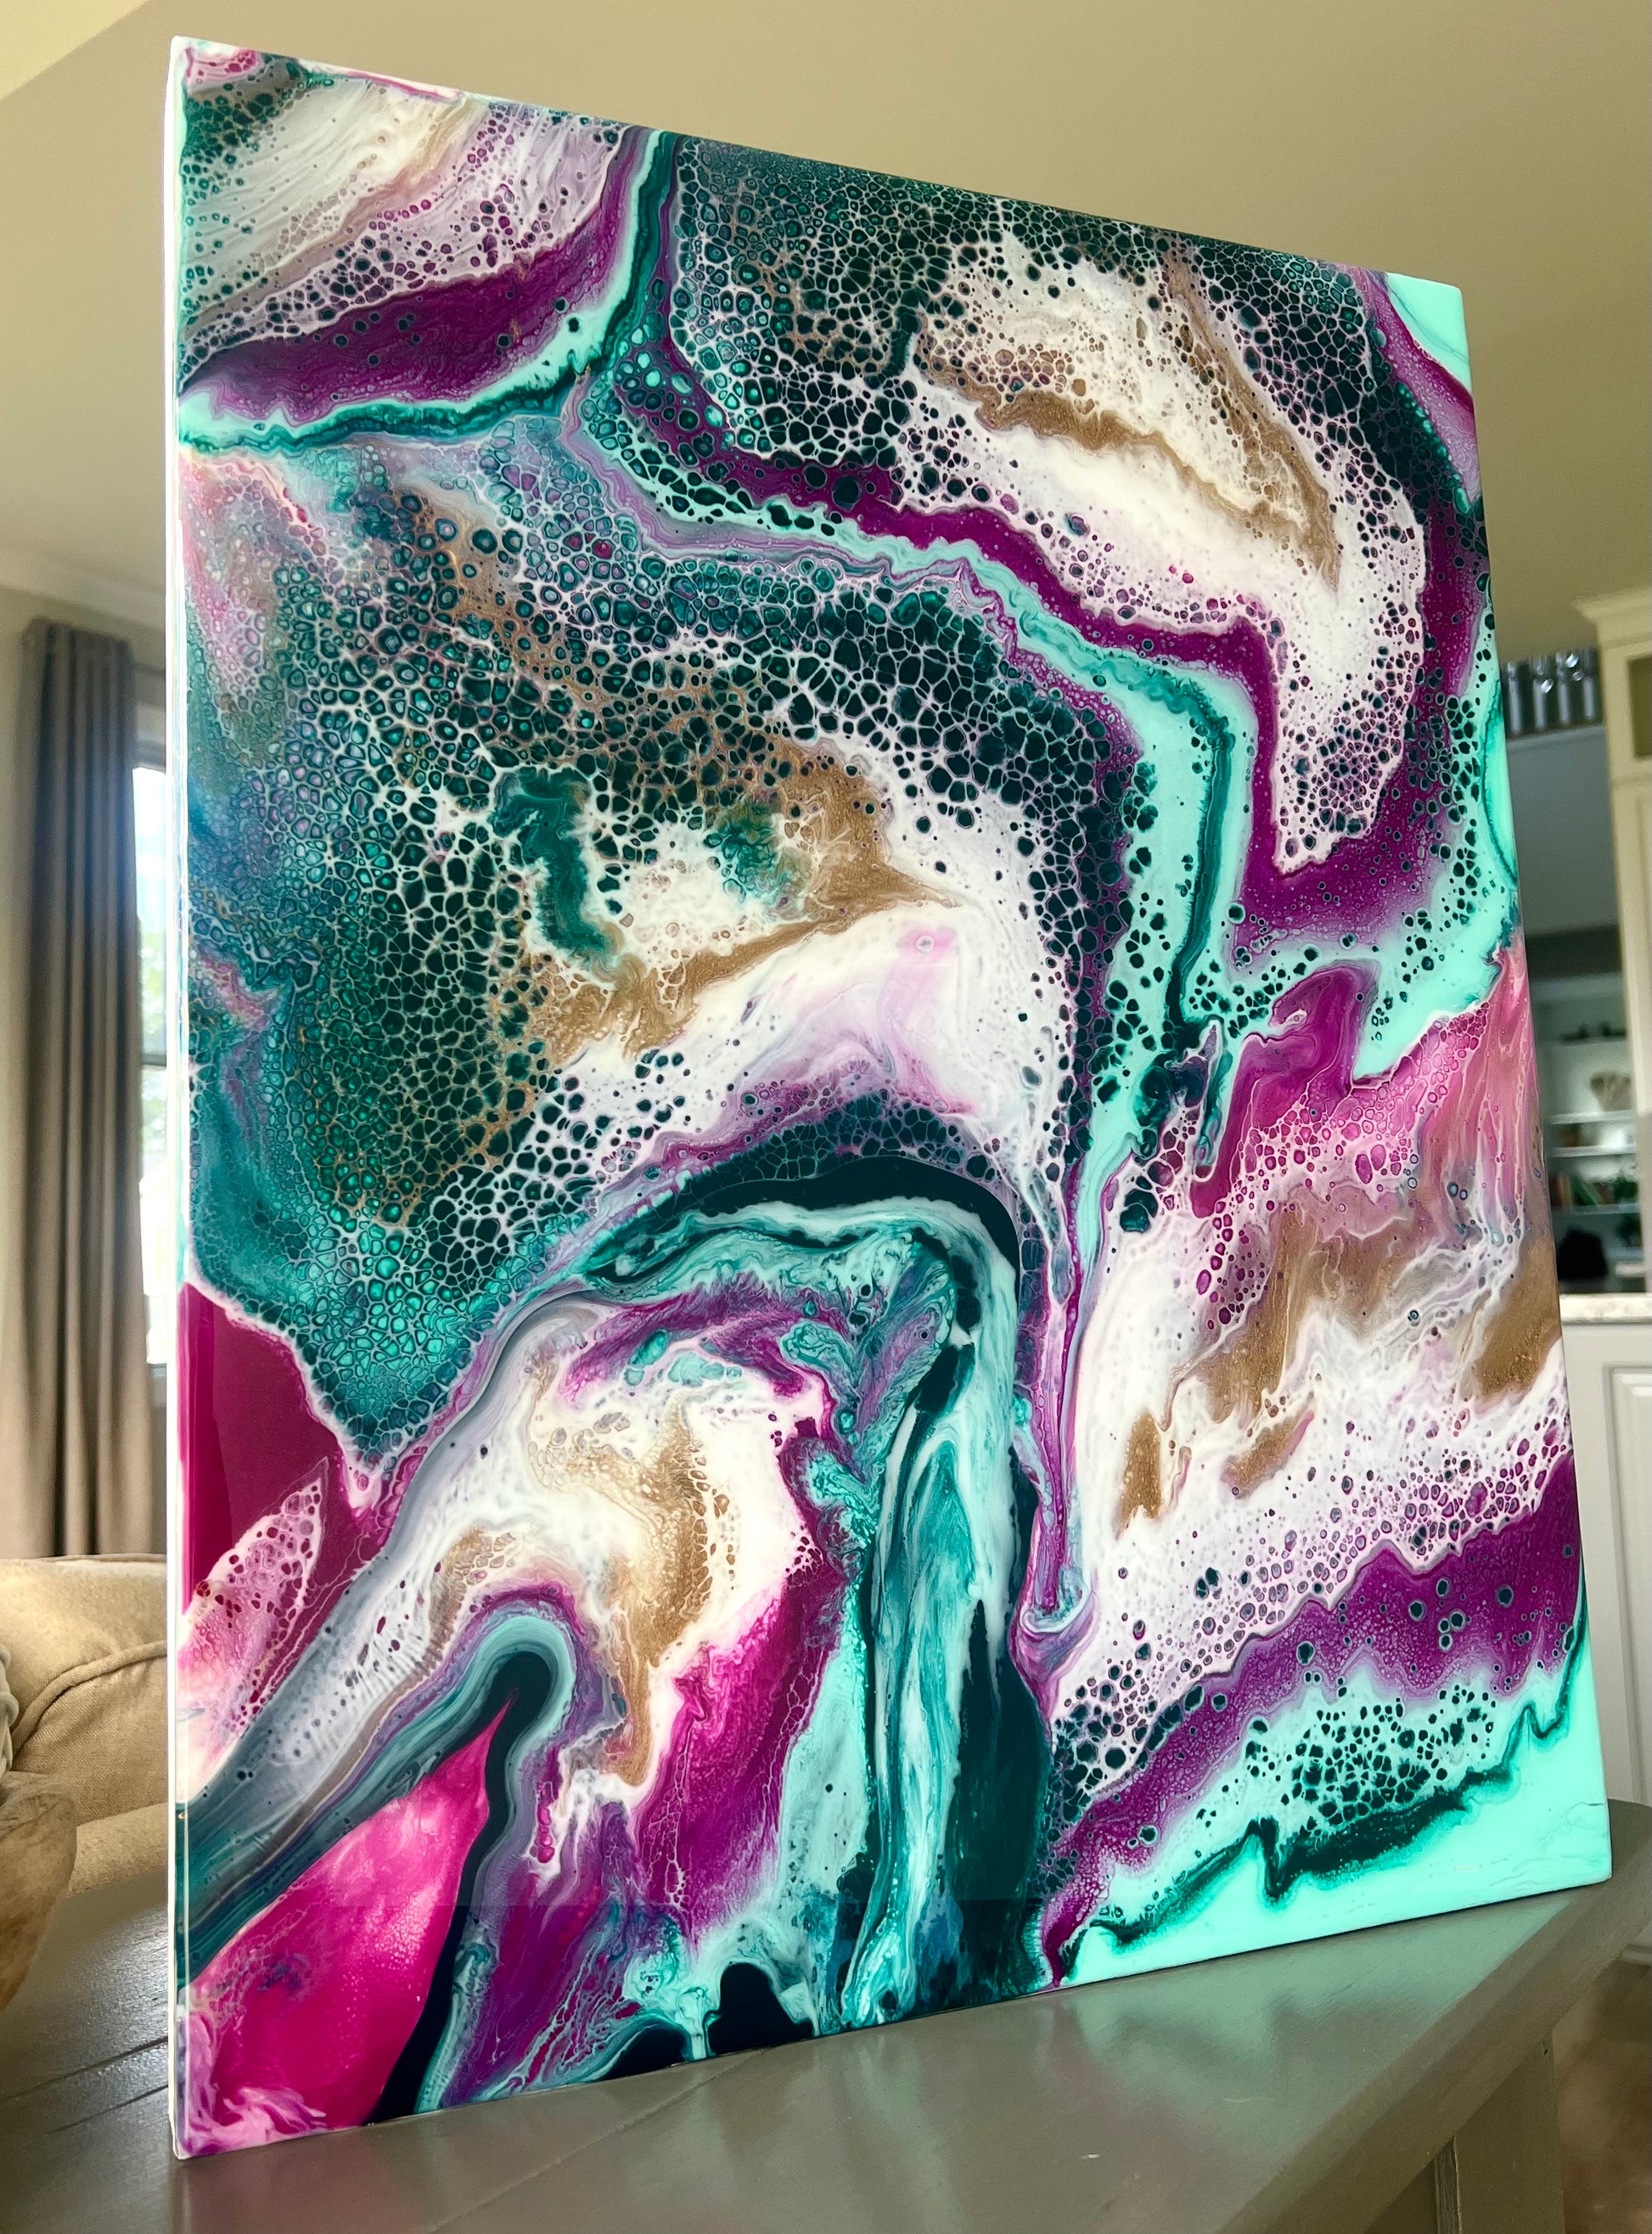 16" x 20" Dark Turqoise, Fuchsia, Light Teal, and Gold Resin Puddle Pour Painting